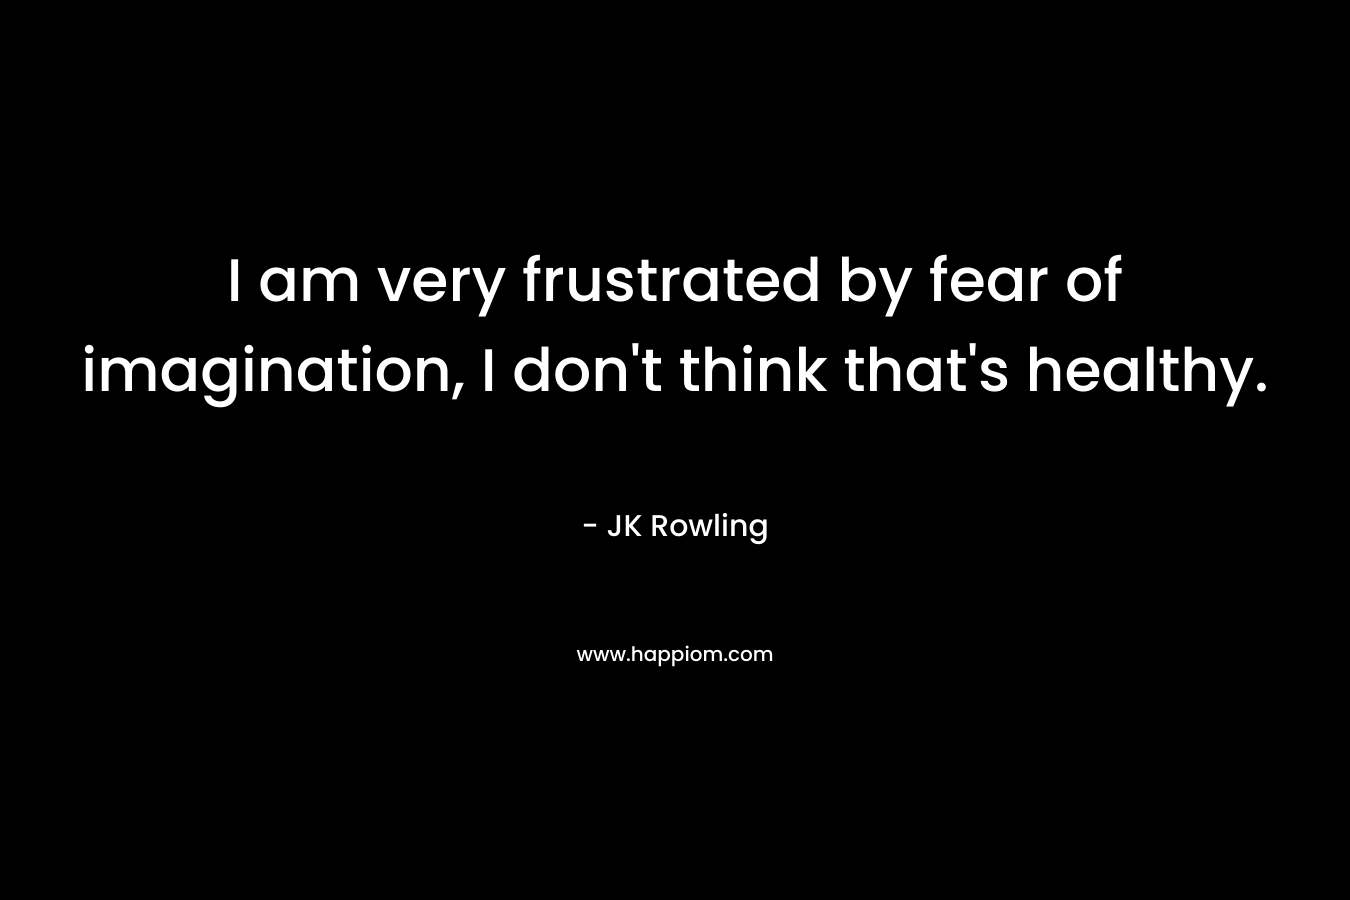 I am very frustrated by fear of imagination, I don’t think that’s healthy. – JK Rowling